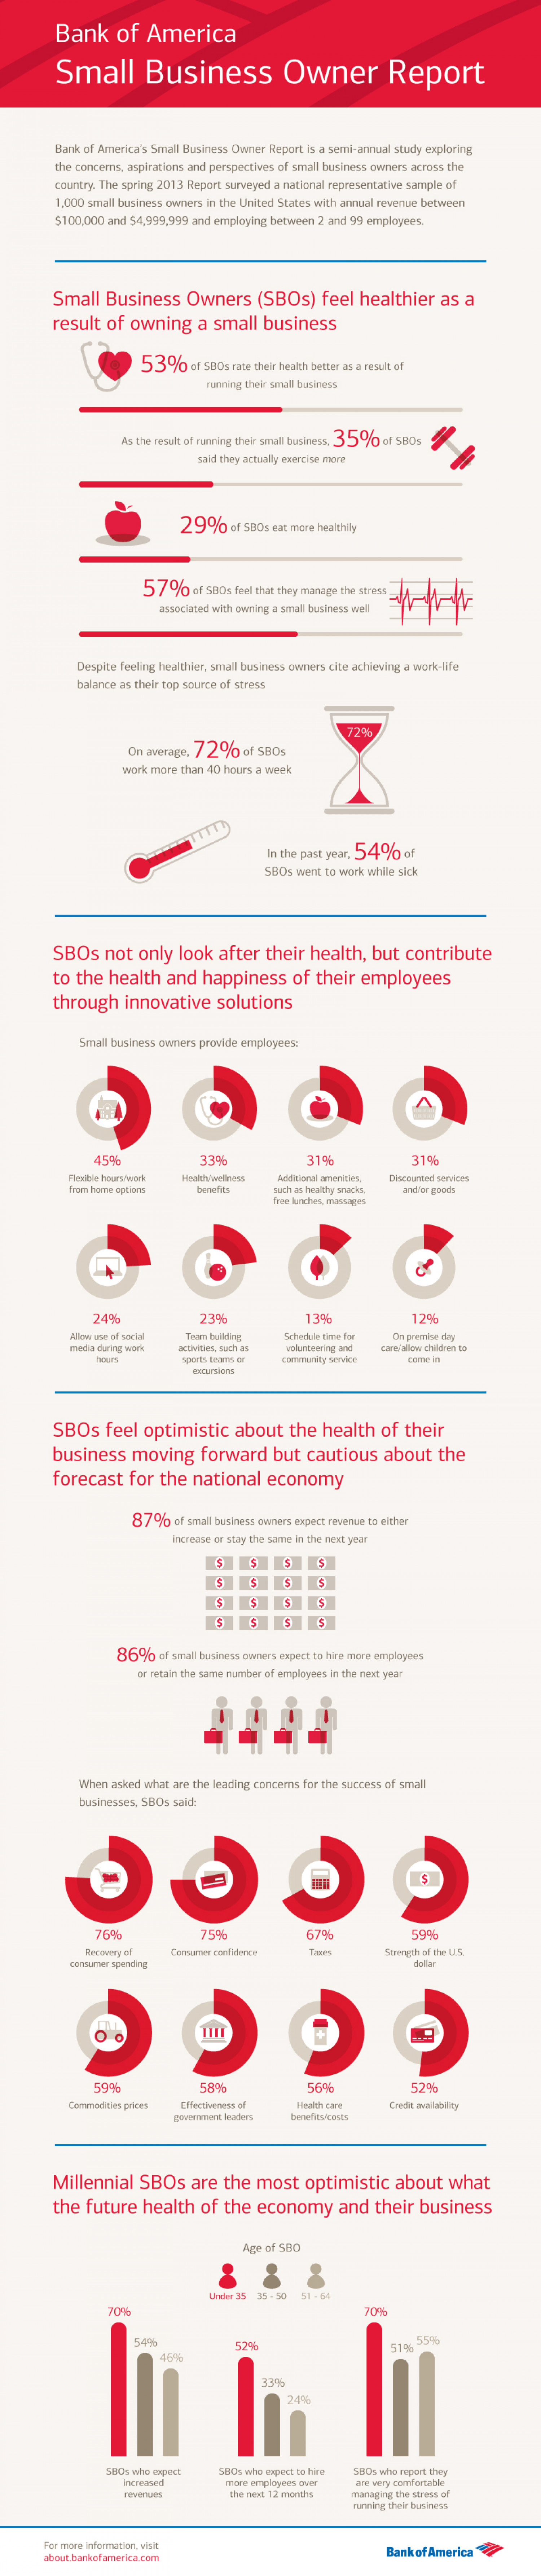 Bank of America Small Business Owner Report Spring 2013 Infographic